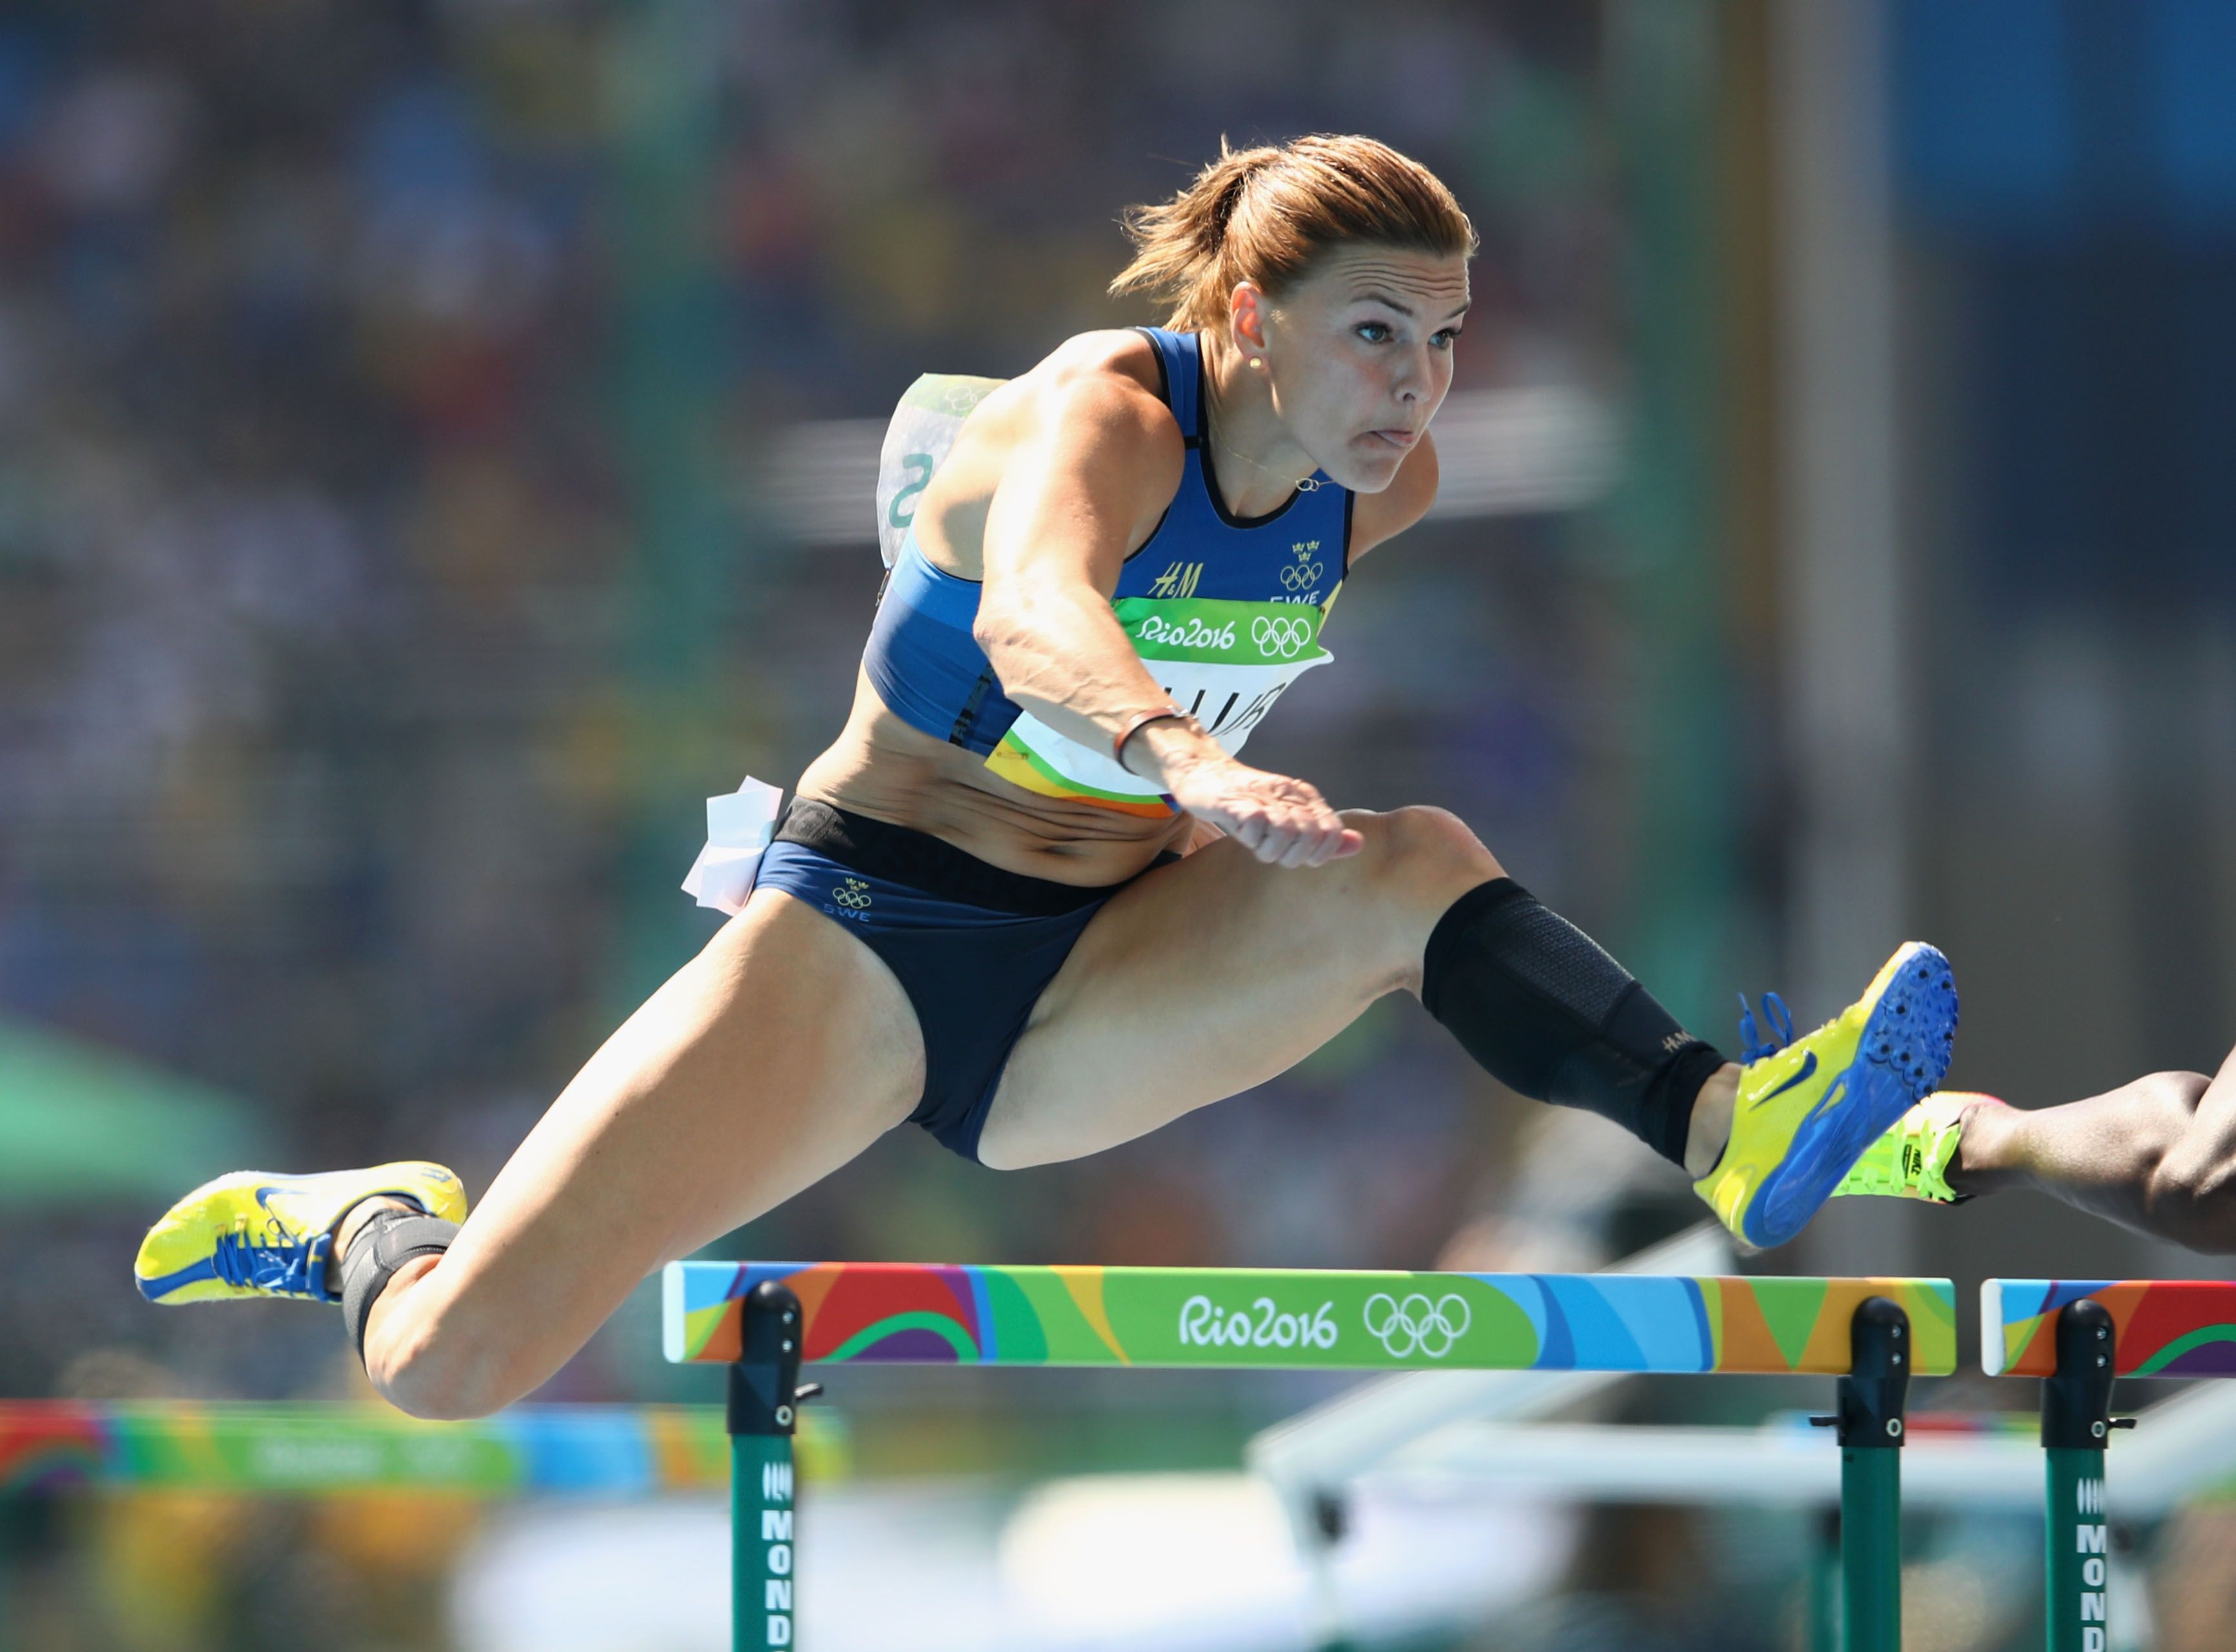 Susanna Kallur competes at the 2016 Olympics in Rio